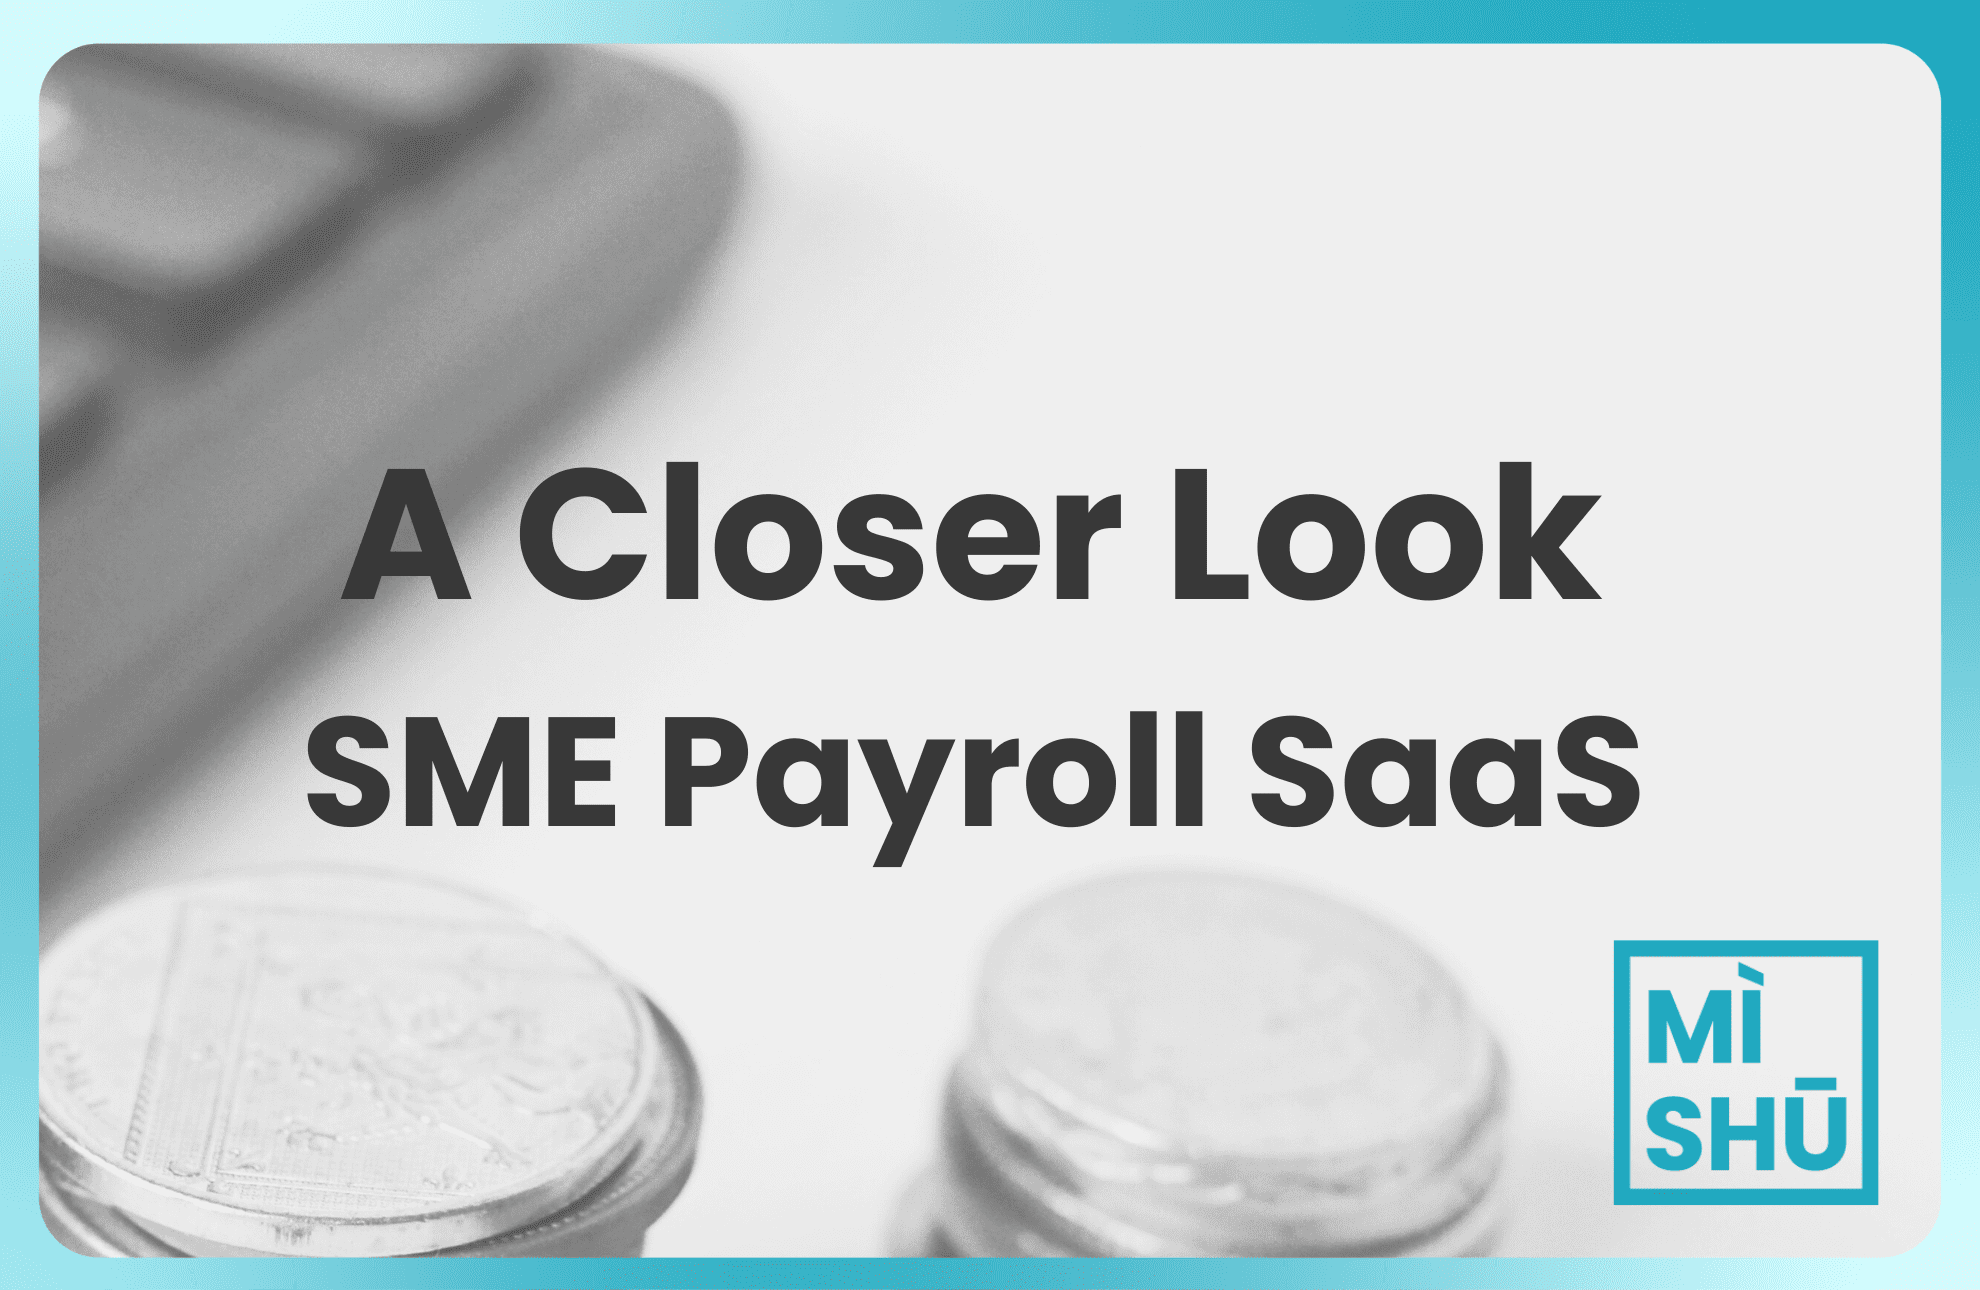 5 Must-Have Features Of Payroll Systems For Small Businesses